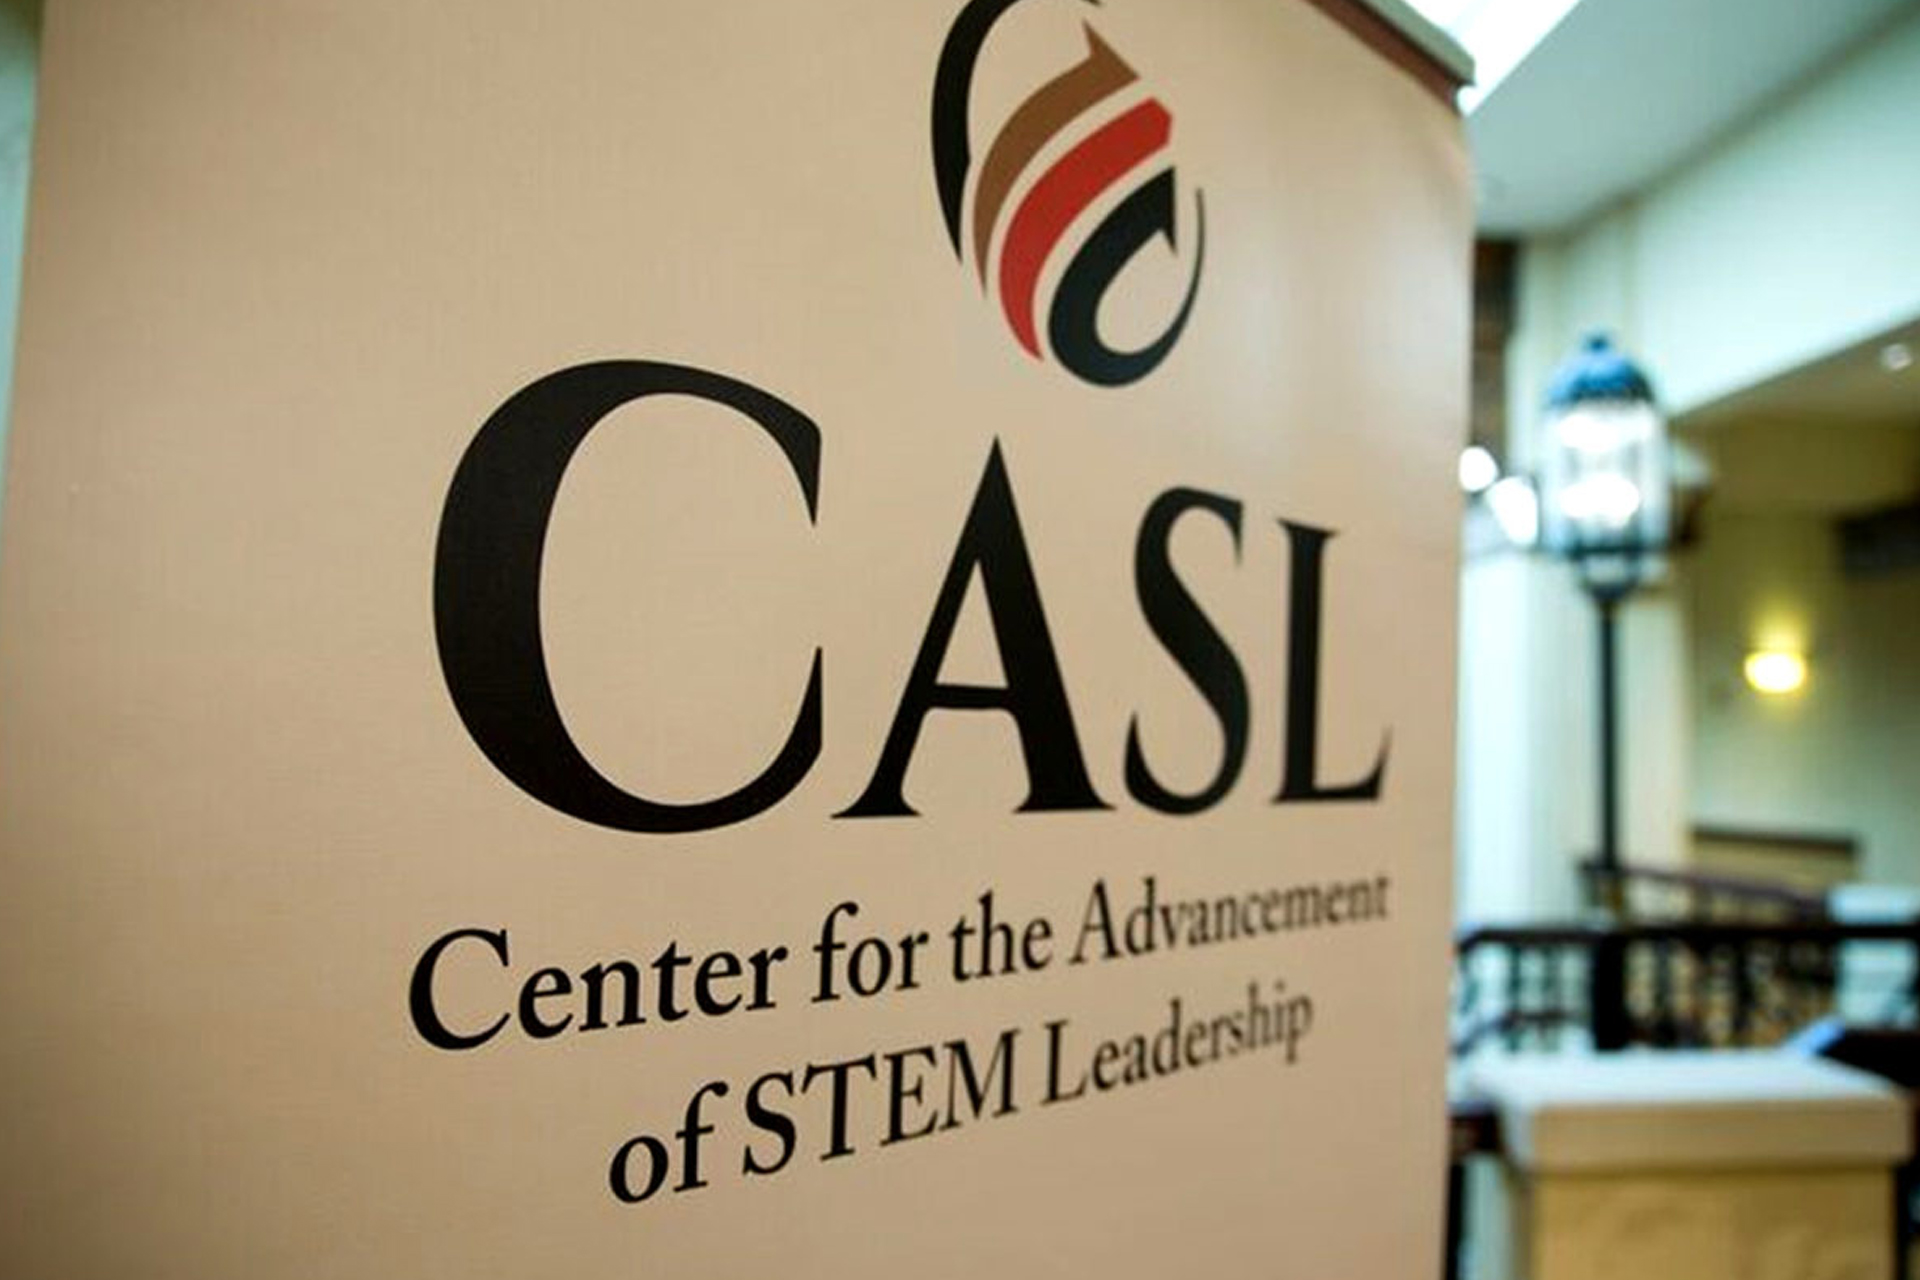 The Center for the Advancement of STEM Leadership (CASL)